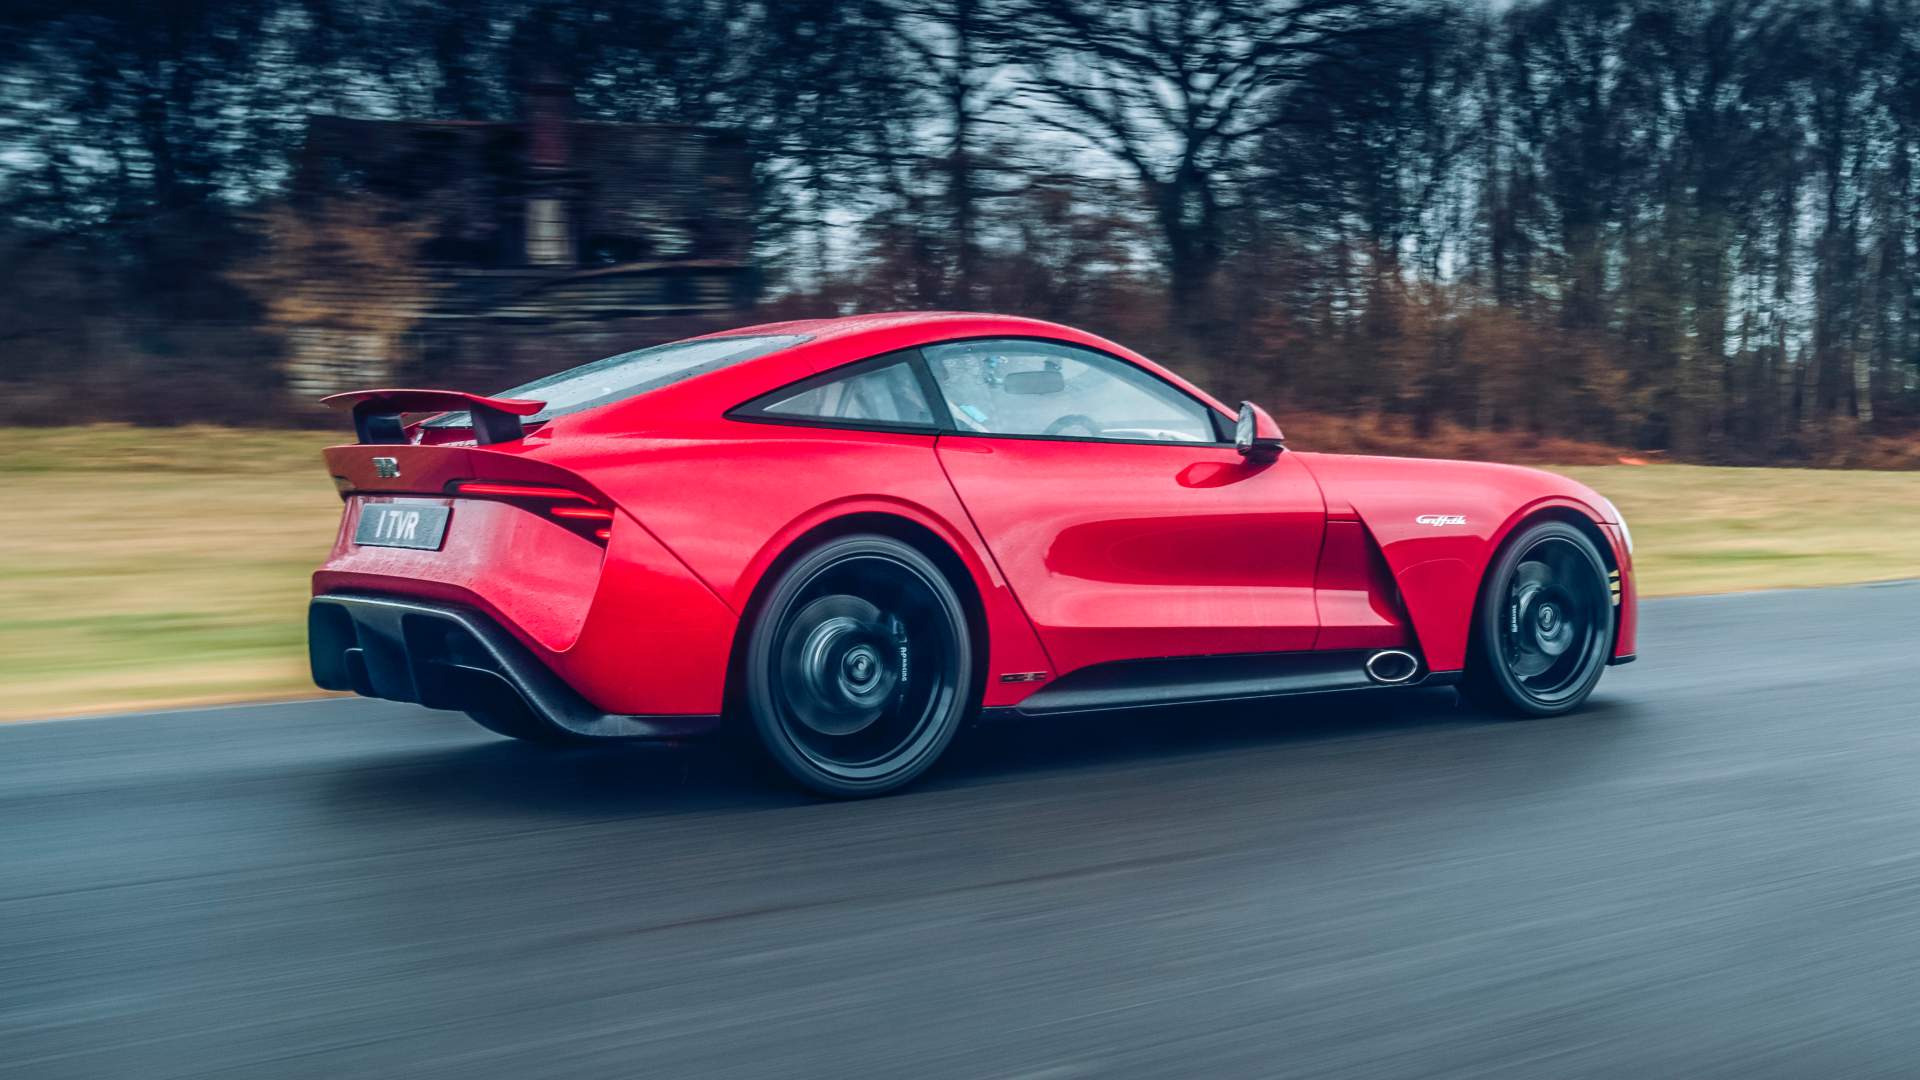 TVR Griffith 2019